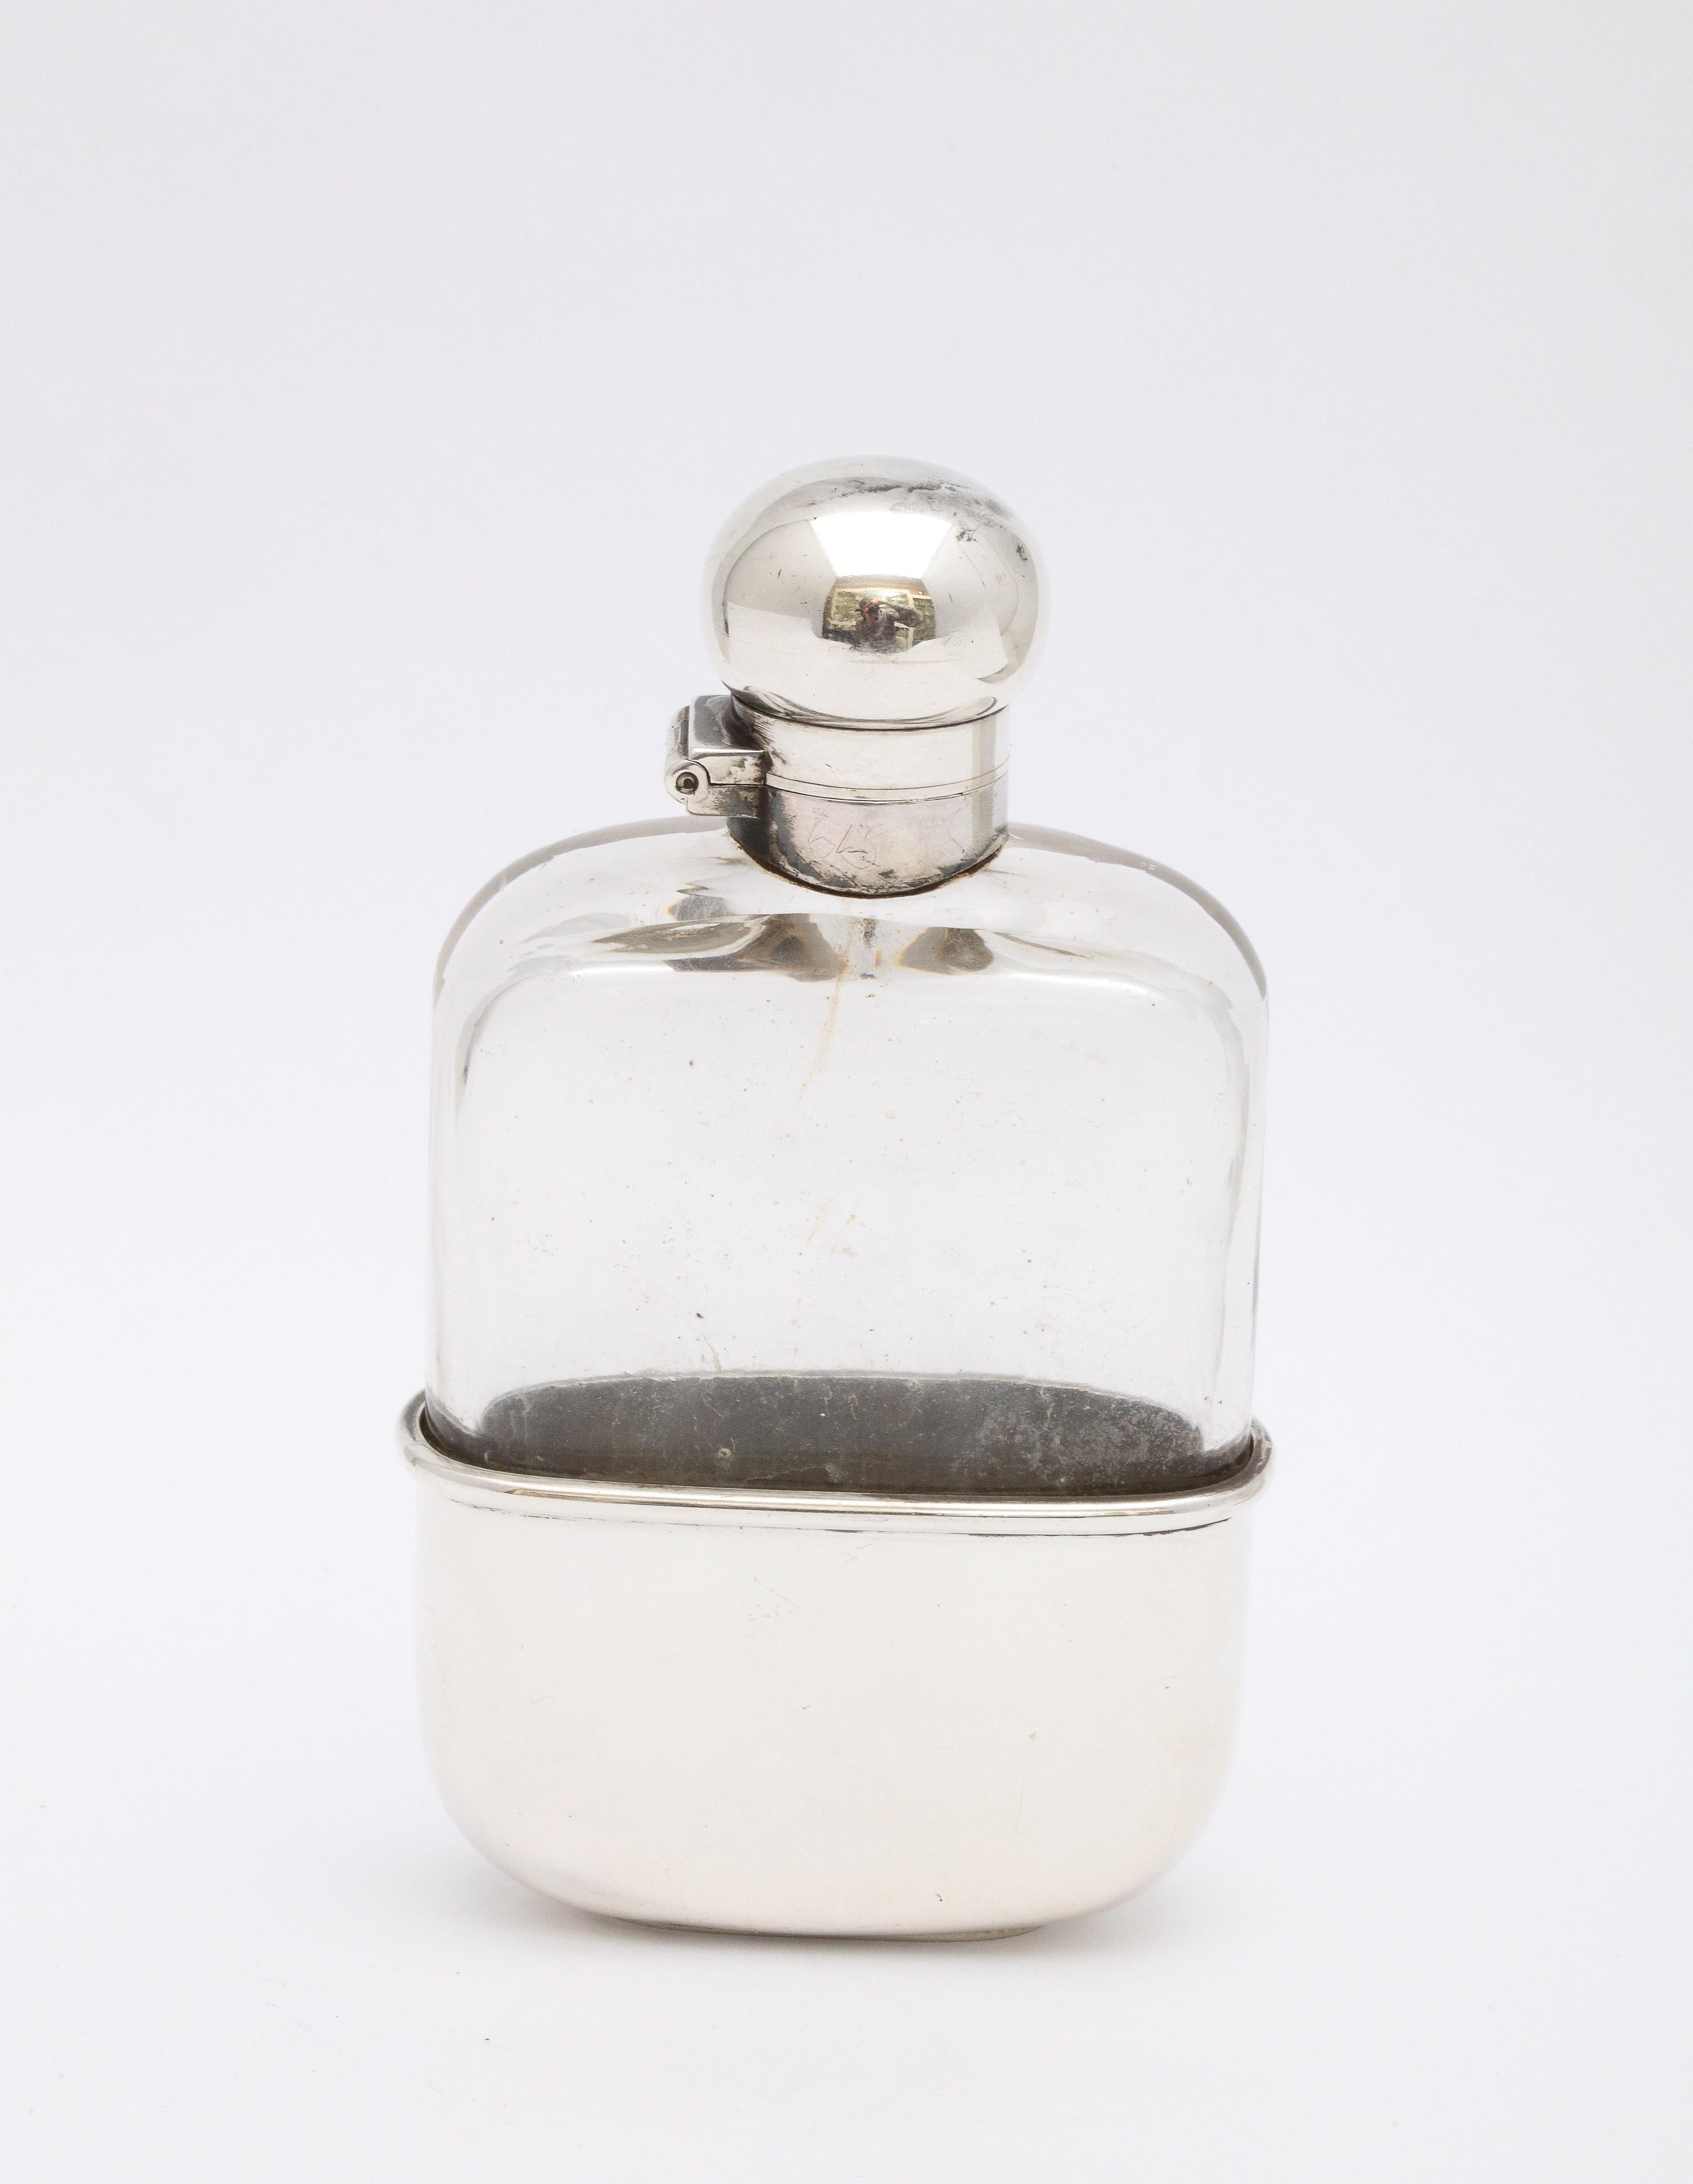 Victorian period, sterling silver-mounted glass liquor flask with hinged lid and removable drinking cup, Chester England, year-hallmarked for 1898, Cohen and Solomon - makers. Sterling silver bottom of flask (the inside of which is lightly gilded)